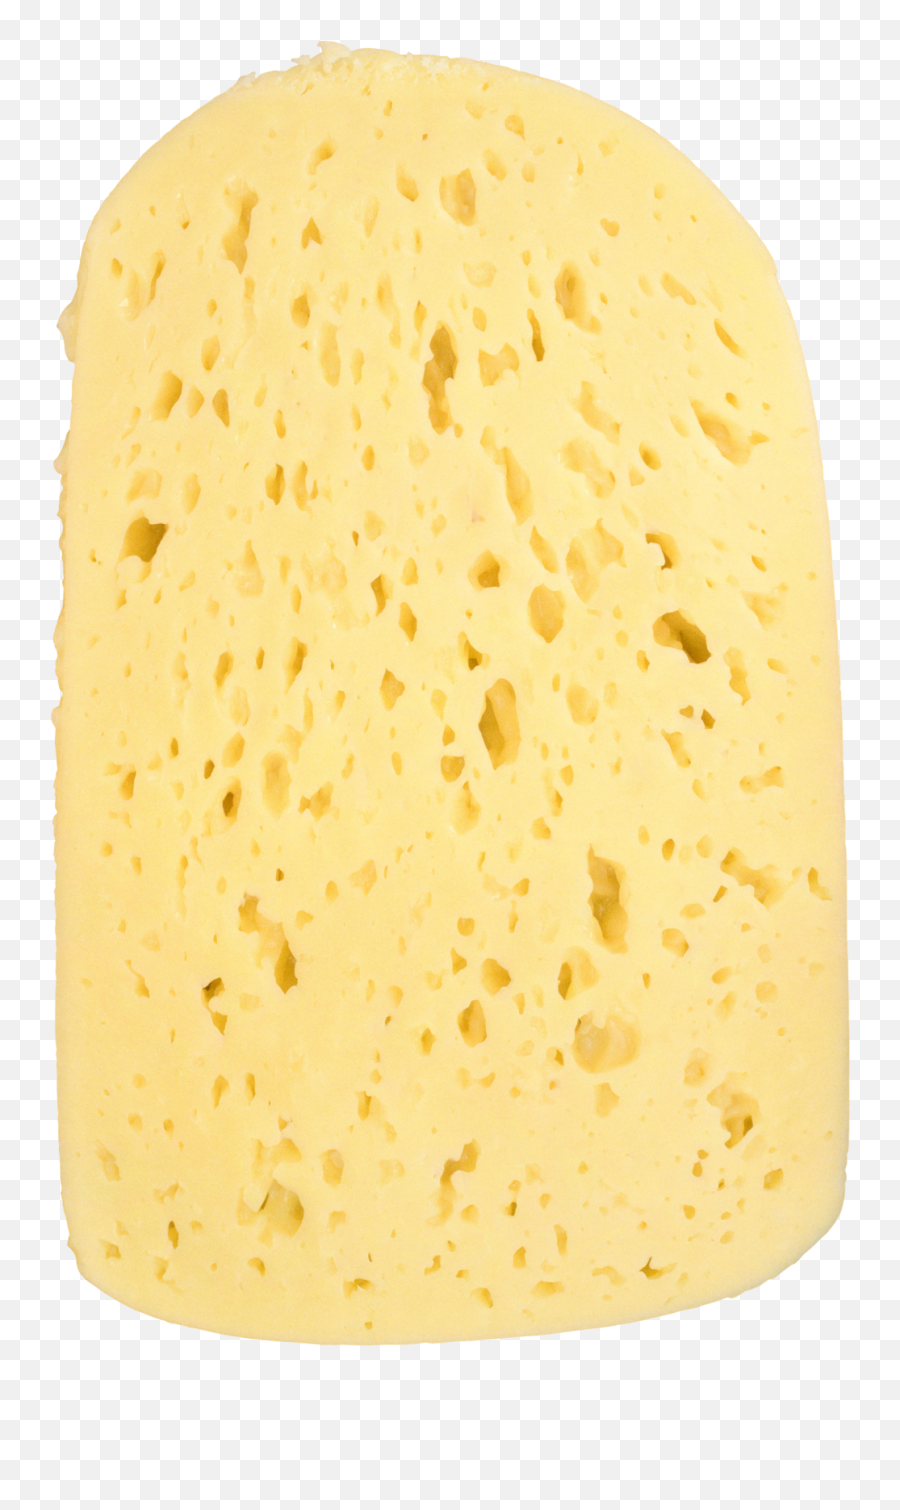 Cheese Png Image Transparent - High Quality Image For Free Emoji,Cheese Emoji